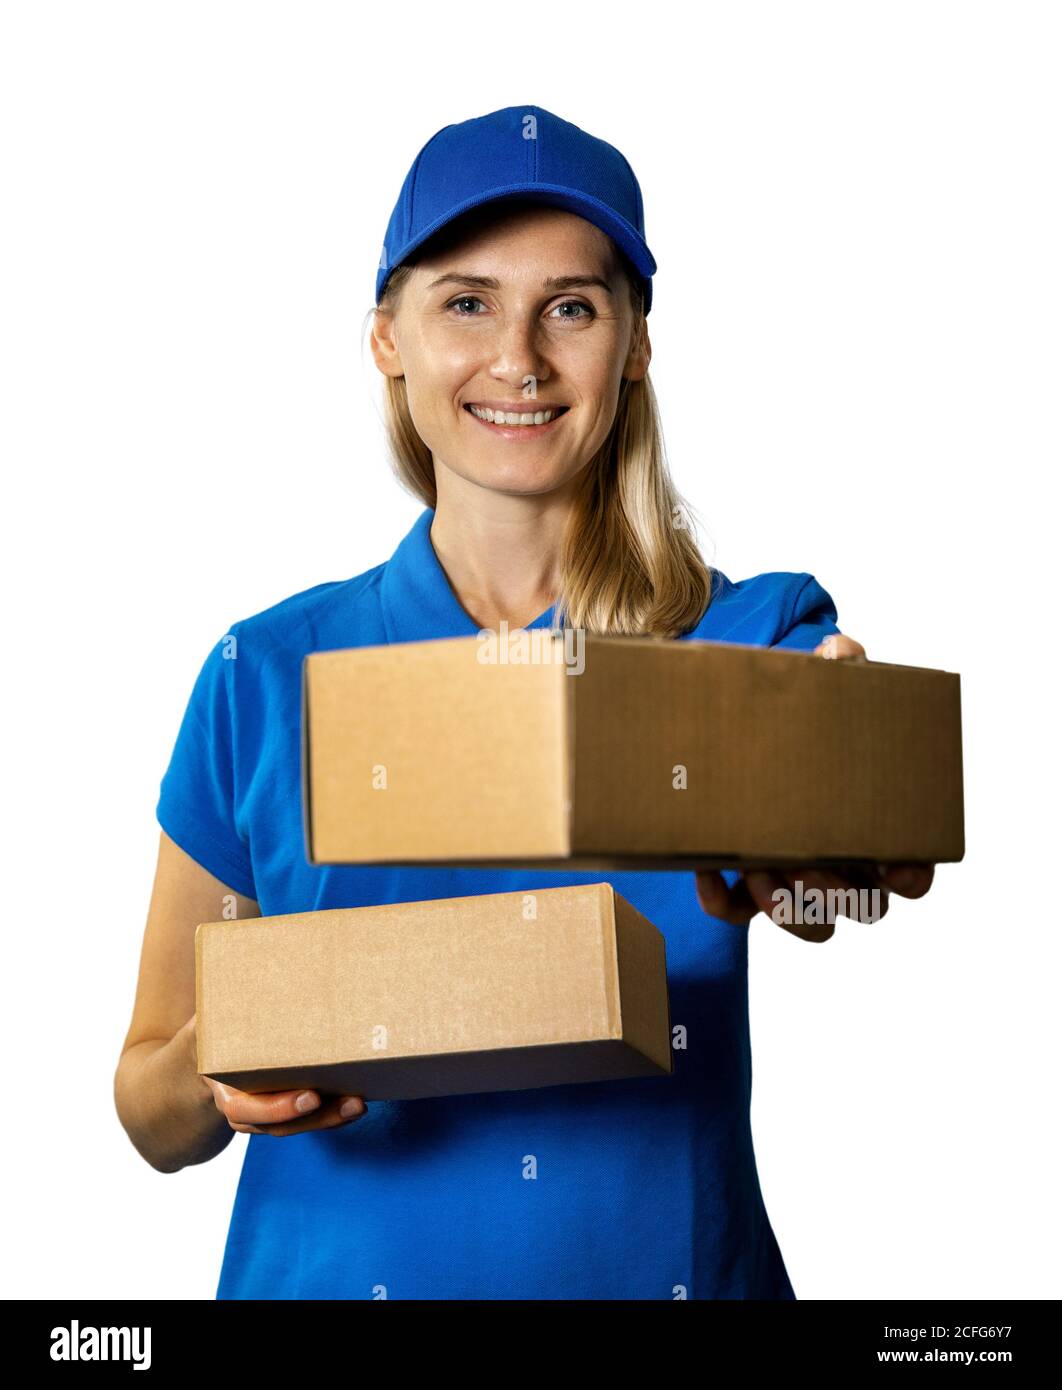 young smiling delivery woman giving cardboard package. isolated on white background Stock Photo